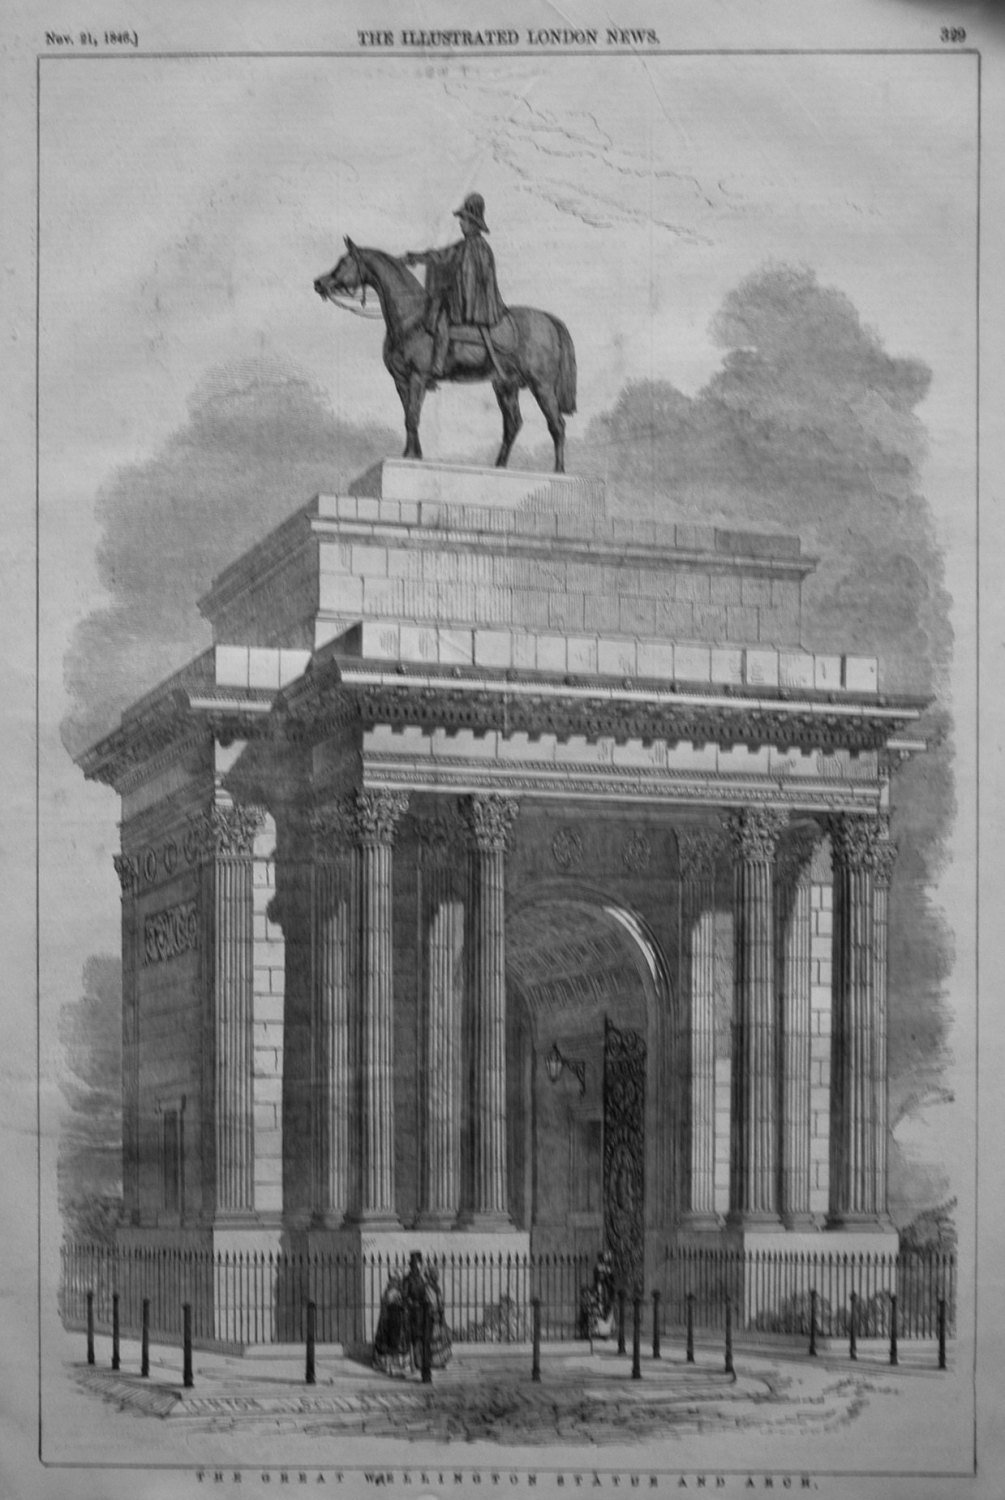 The Great Wellington Statue and Arch. 1846